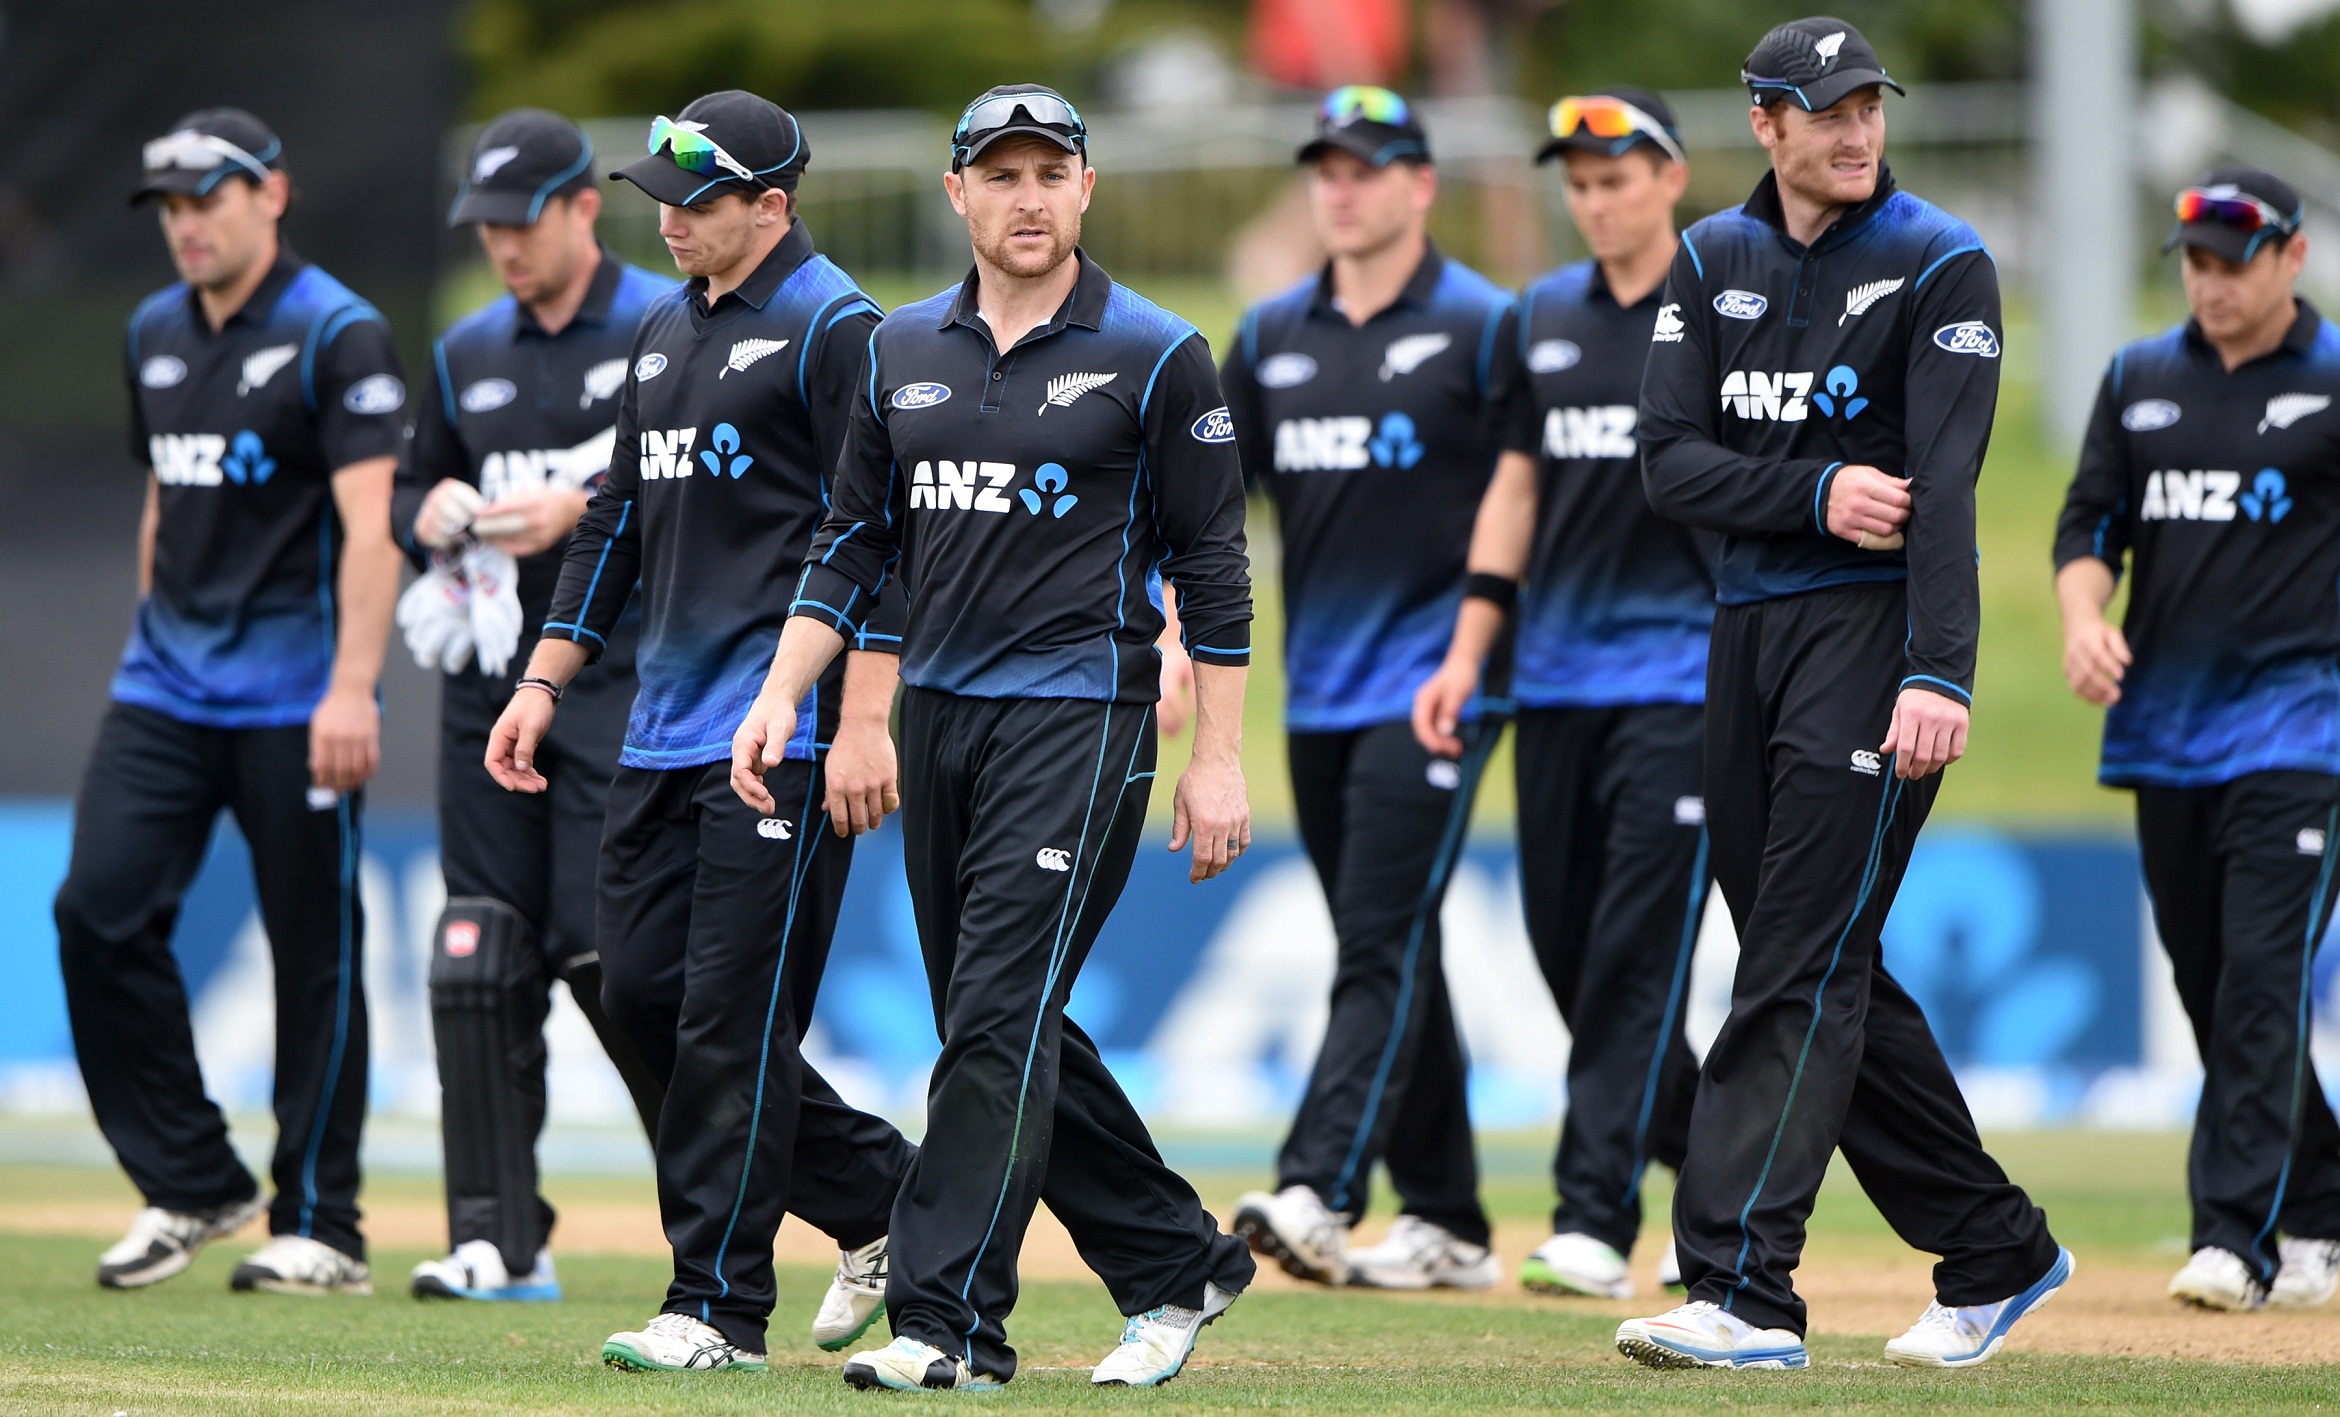 Brendon McCullum leads the players from the field after a comprehensive defeat in the first ODI. ANZ One Day International Cricket Series between New Zealand Back Caps and South Africa, Mount Maunganui, New Zealand. Tuesday 21 October 2014. Photo: Andrew Cornaga/www.Photosport.co.nz